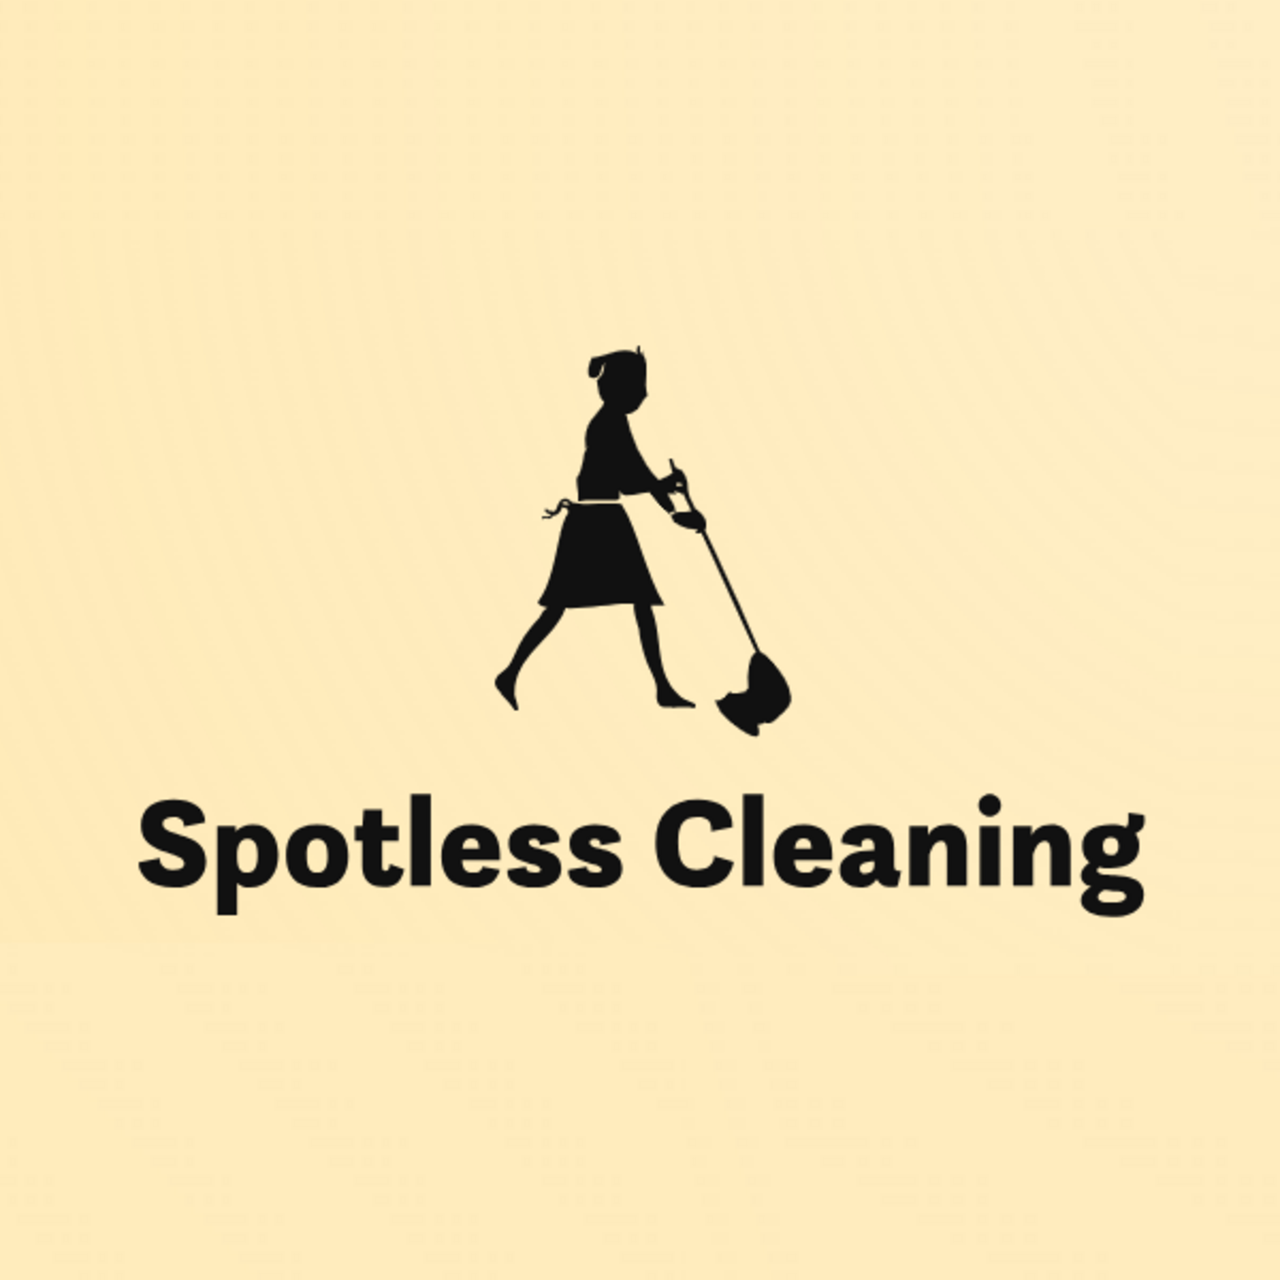 Spotless cleaning's logo